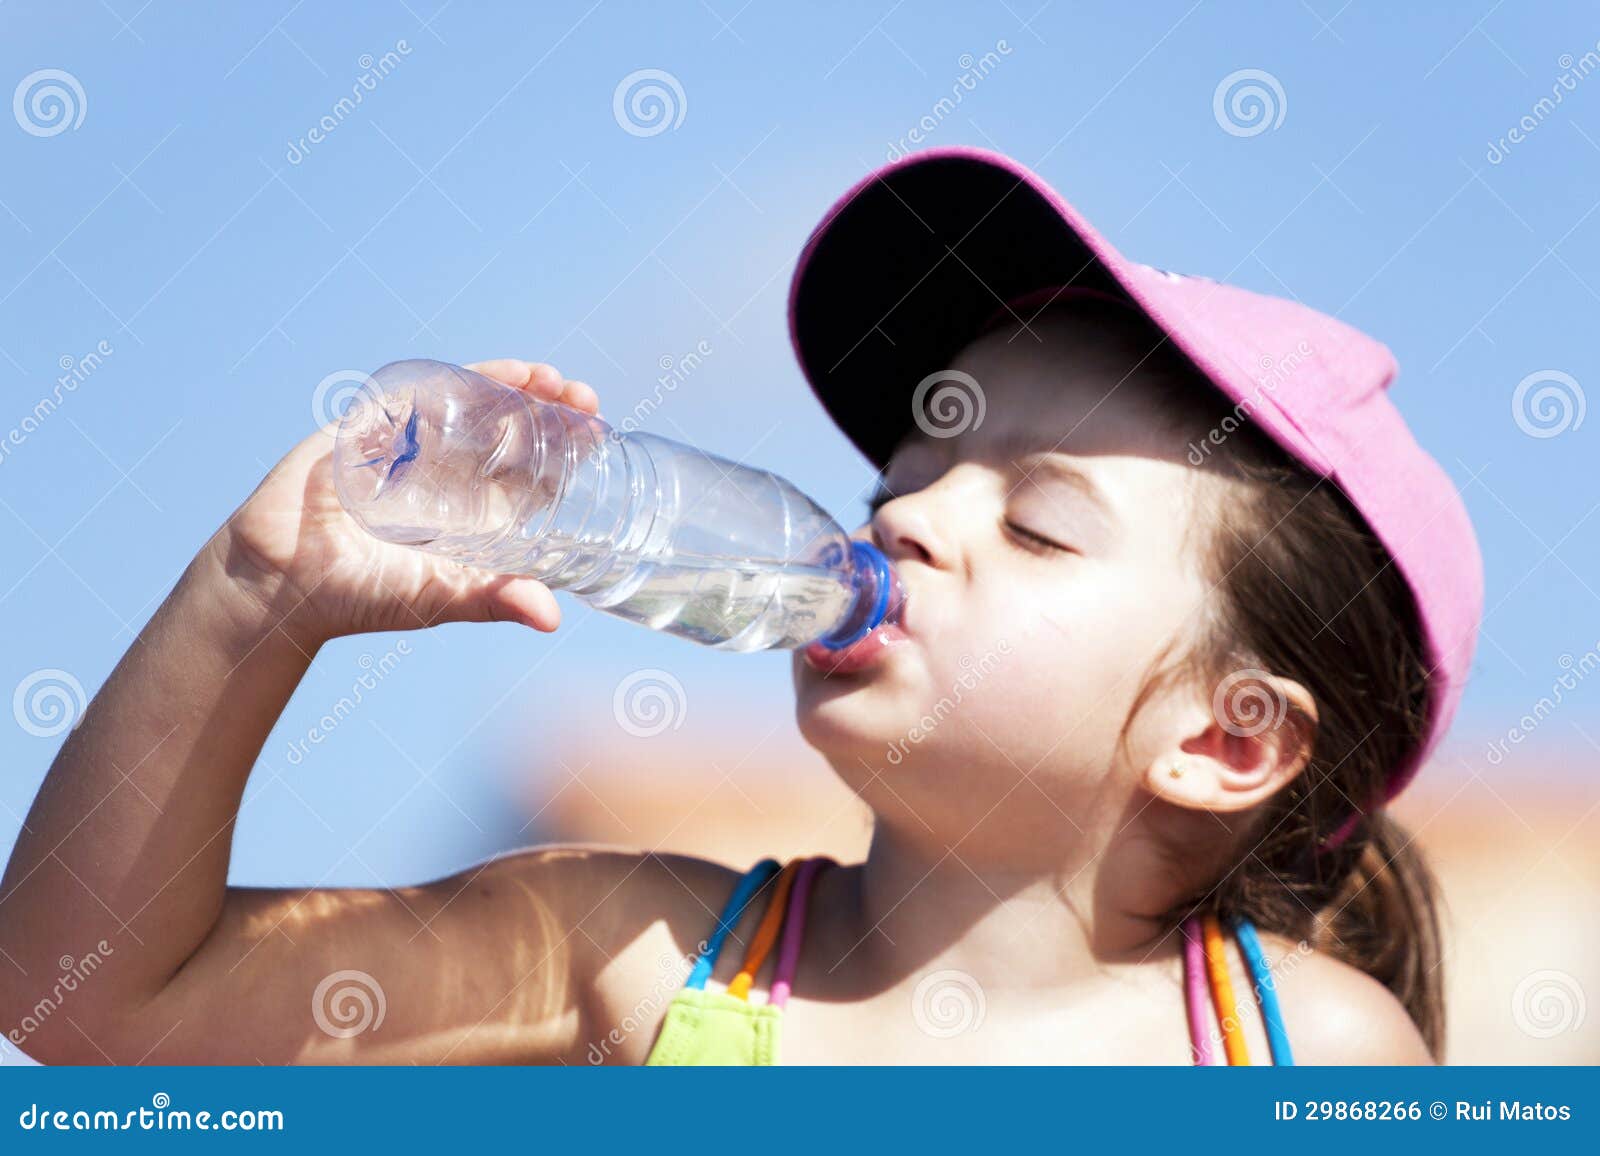 young girl drinking water